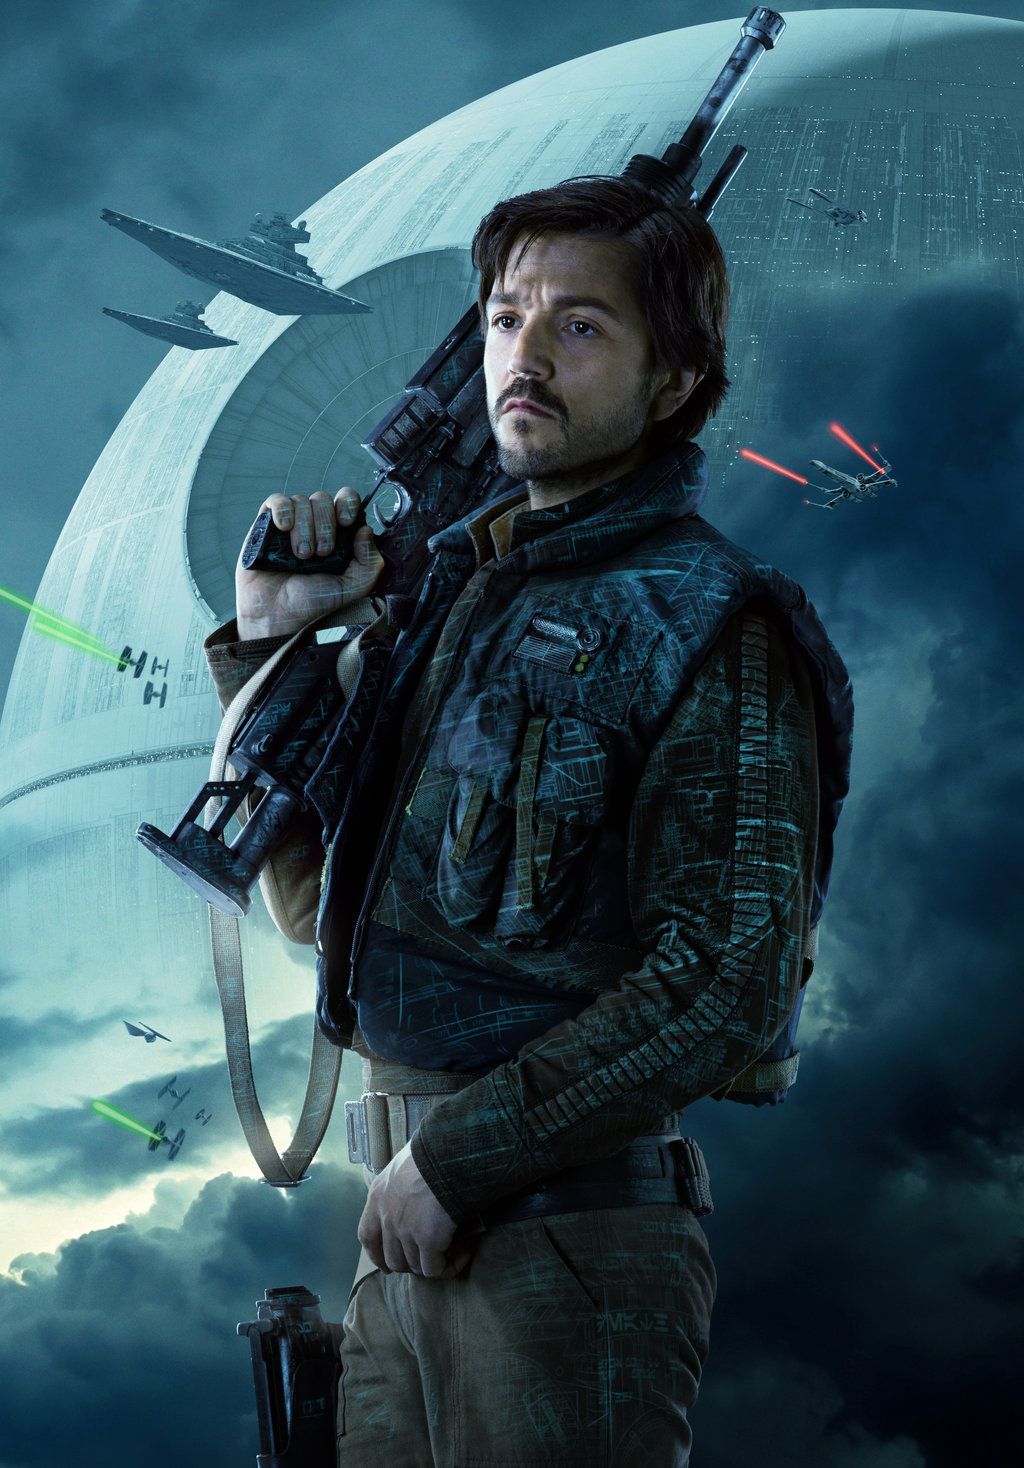 Cassian Andor and K-2SO Commander Expansion